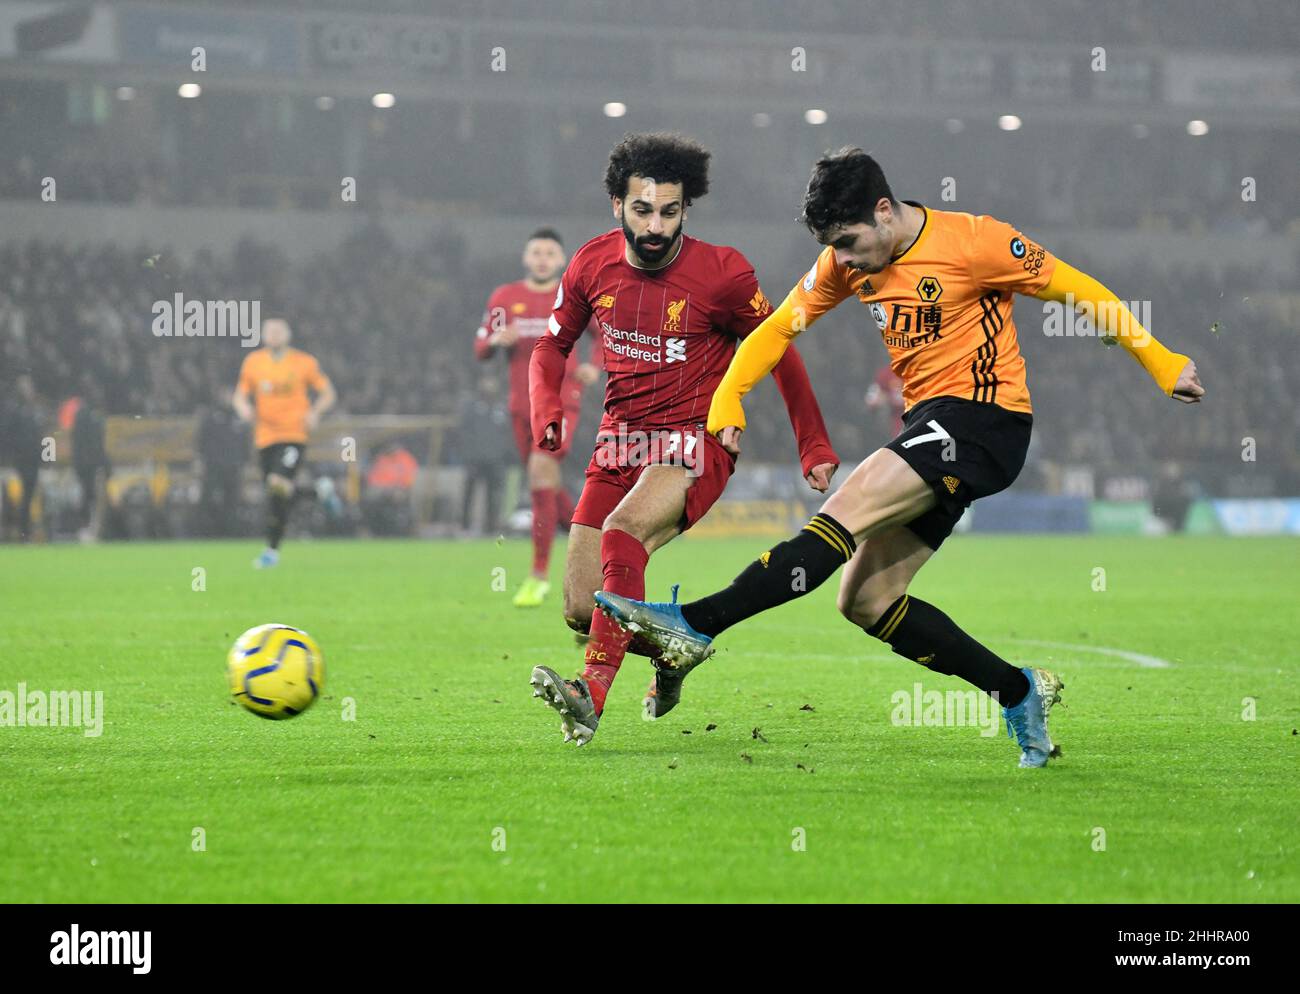 Wolves footballer Pedro Neto and Mohamed Salah of Liverpool. Wolverhampton Wanderers v Liverpool at Molineux Stadium 23/01/2020 Stock Photo